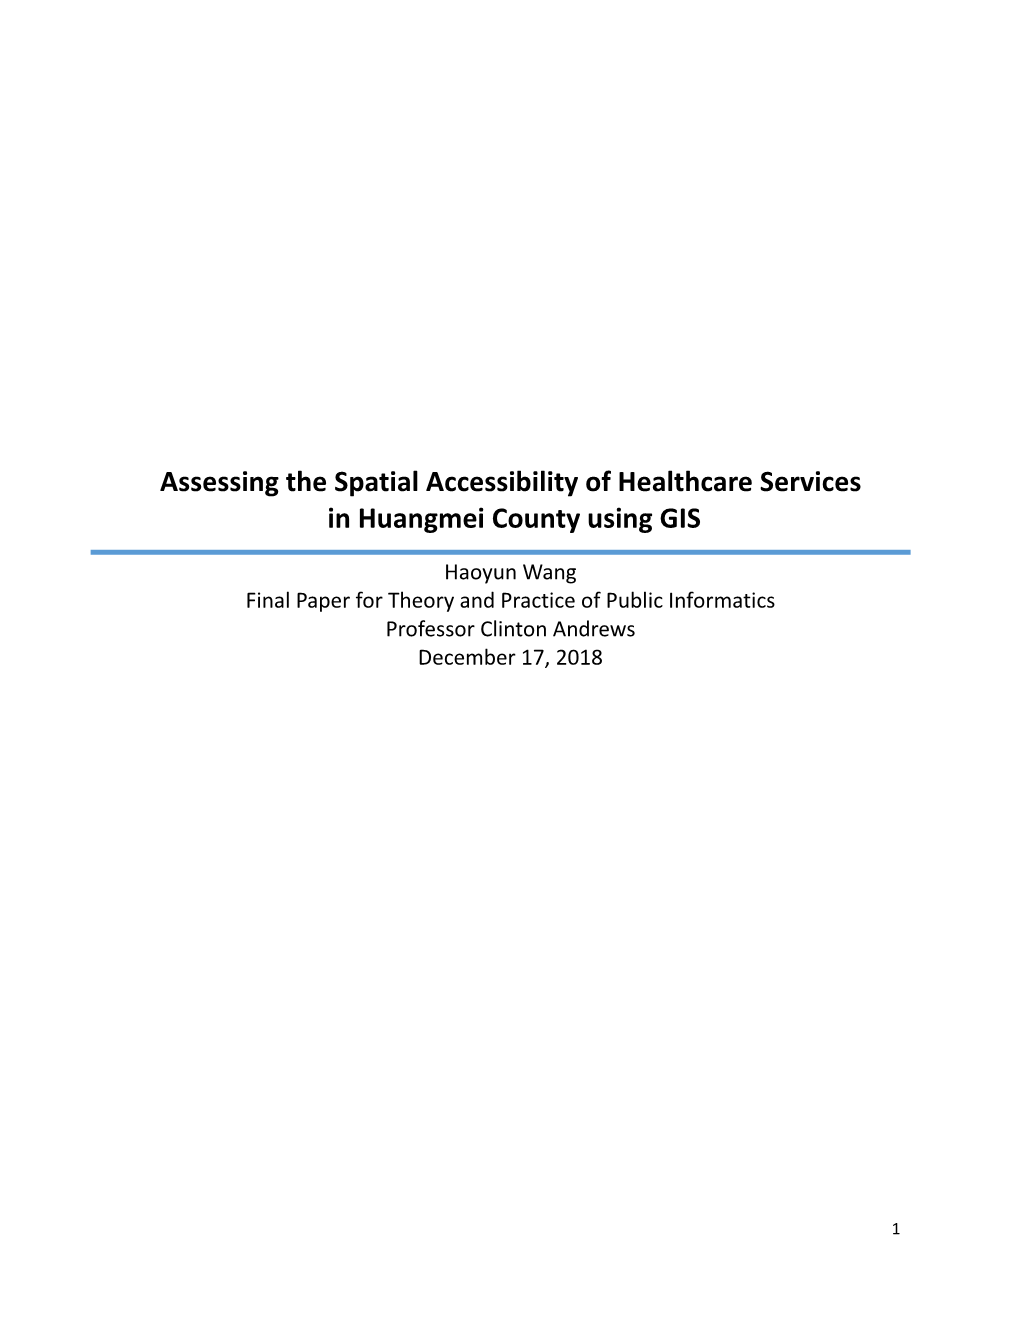 Assessing the Spatial Accessibility of Healthcare Services in Huangmei County Using GIS